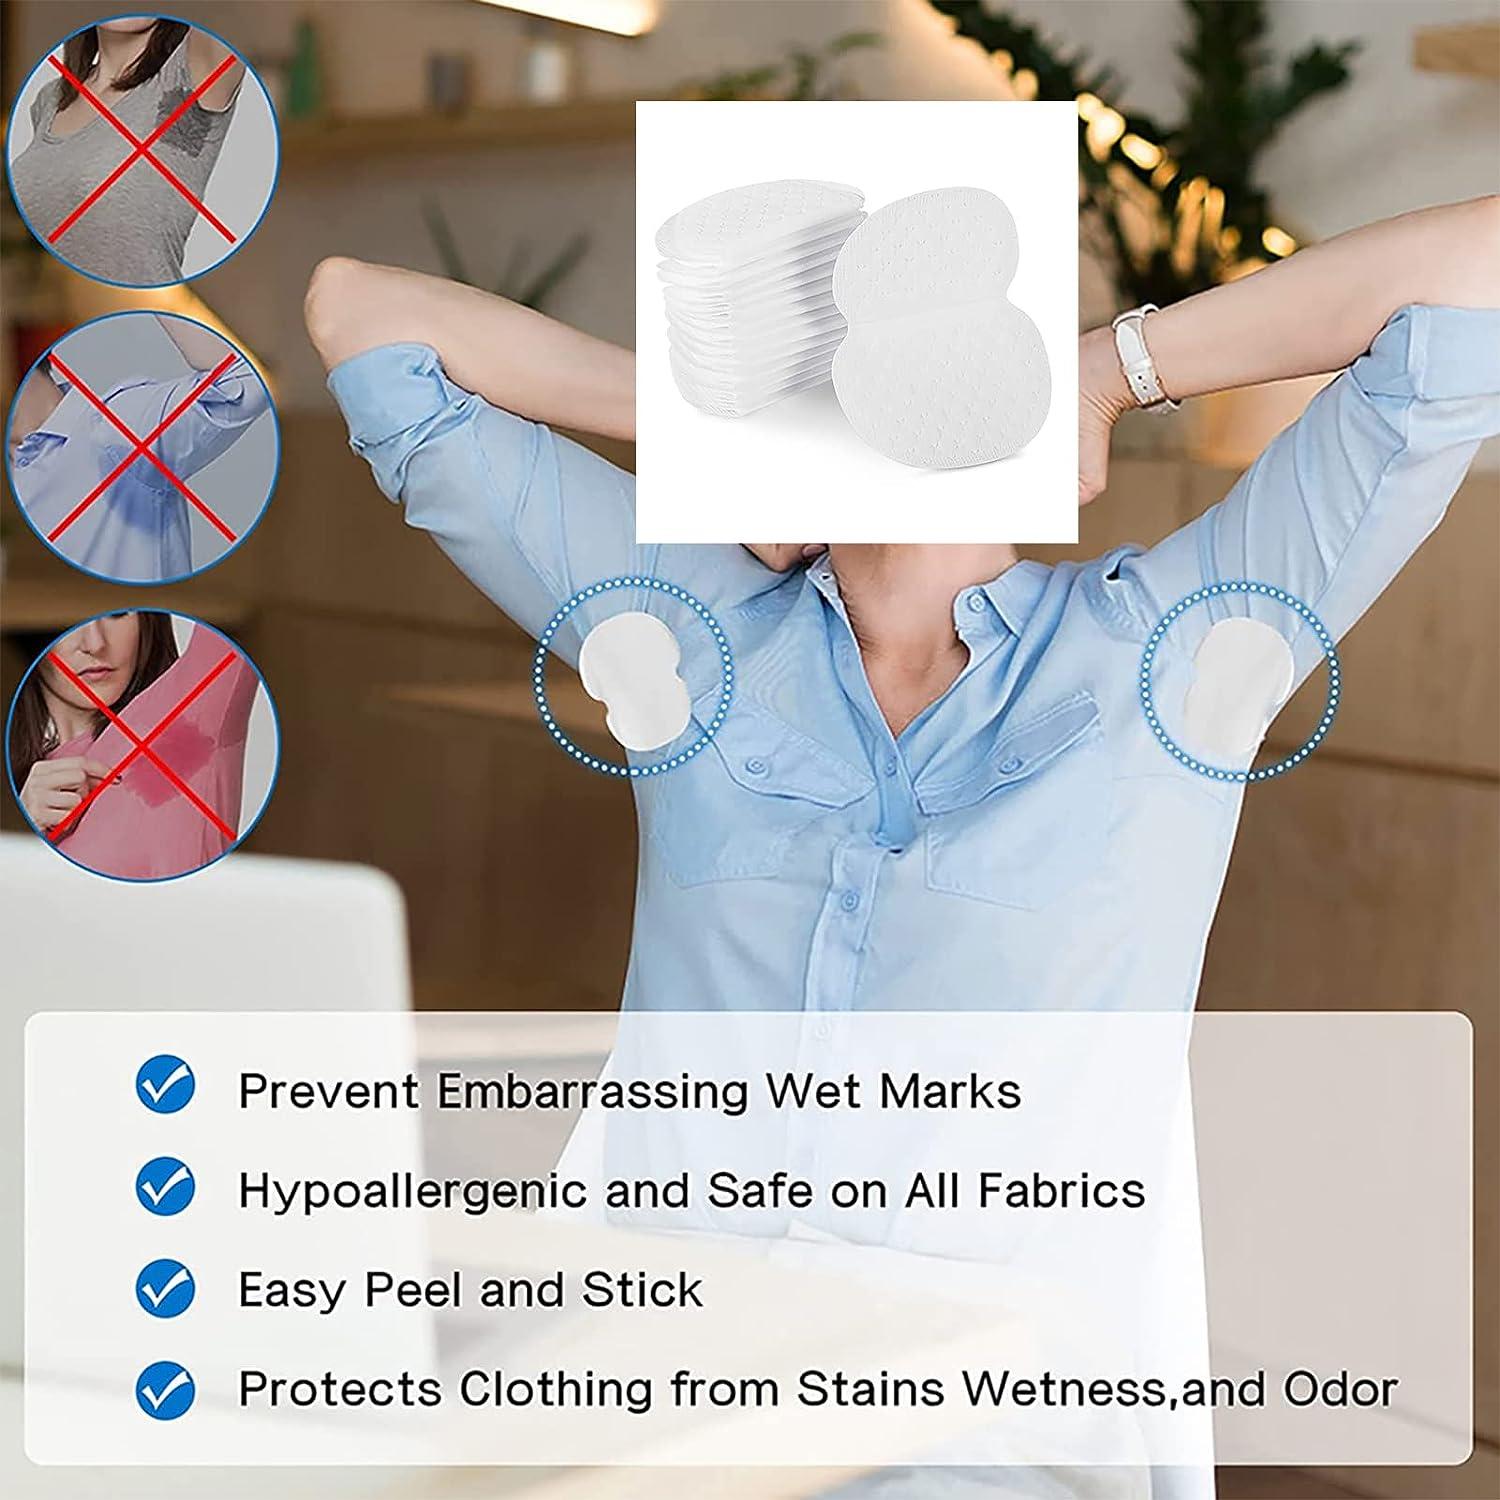 Dry Shield Absorbent Pads for Sweating, 10pcs